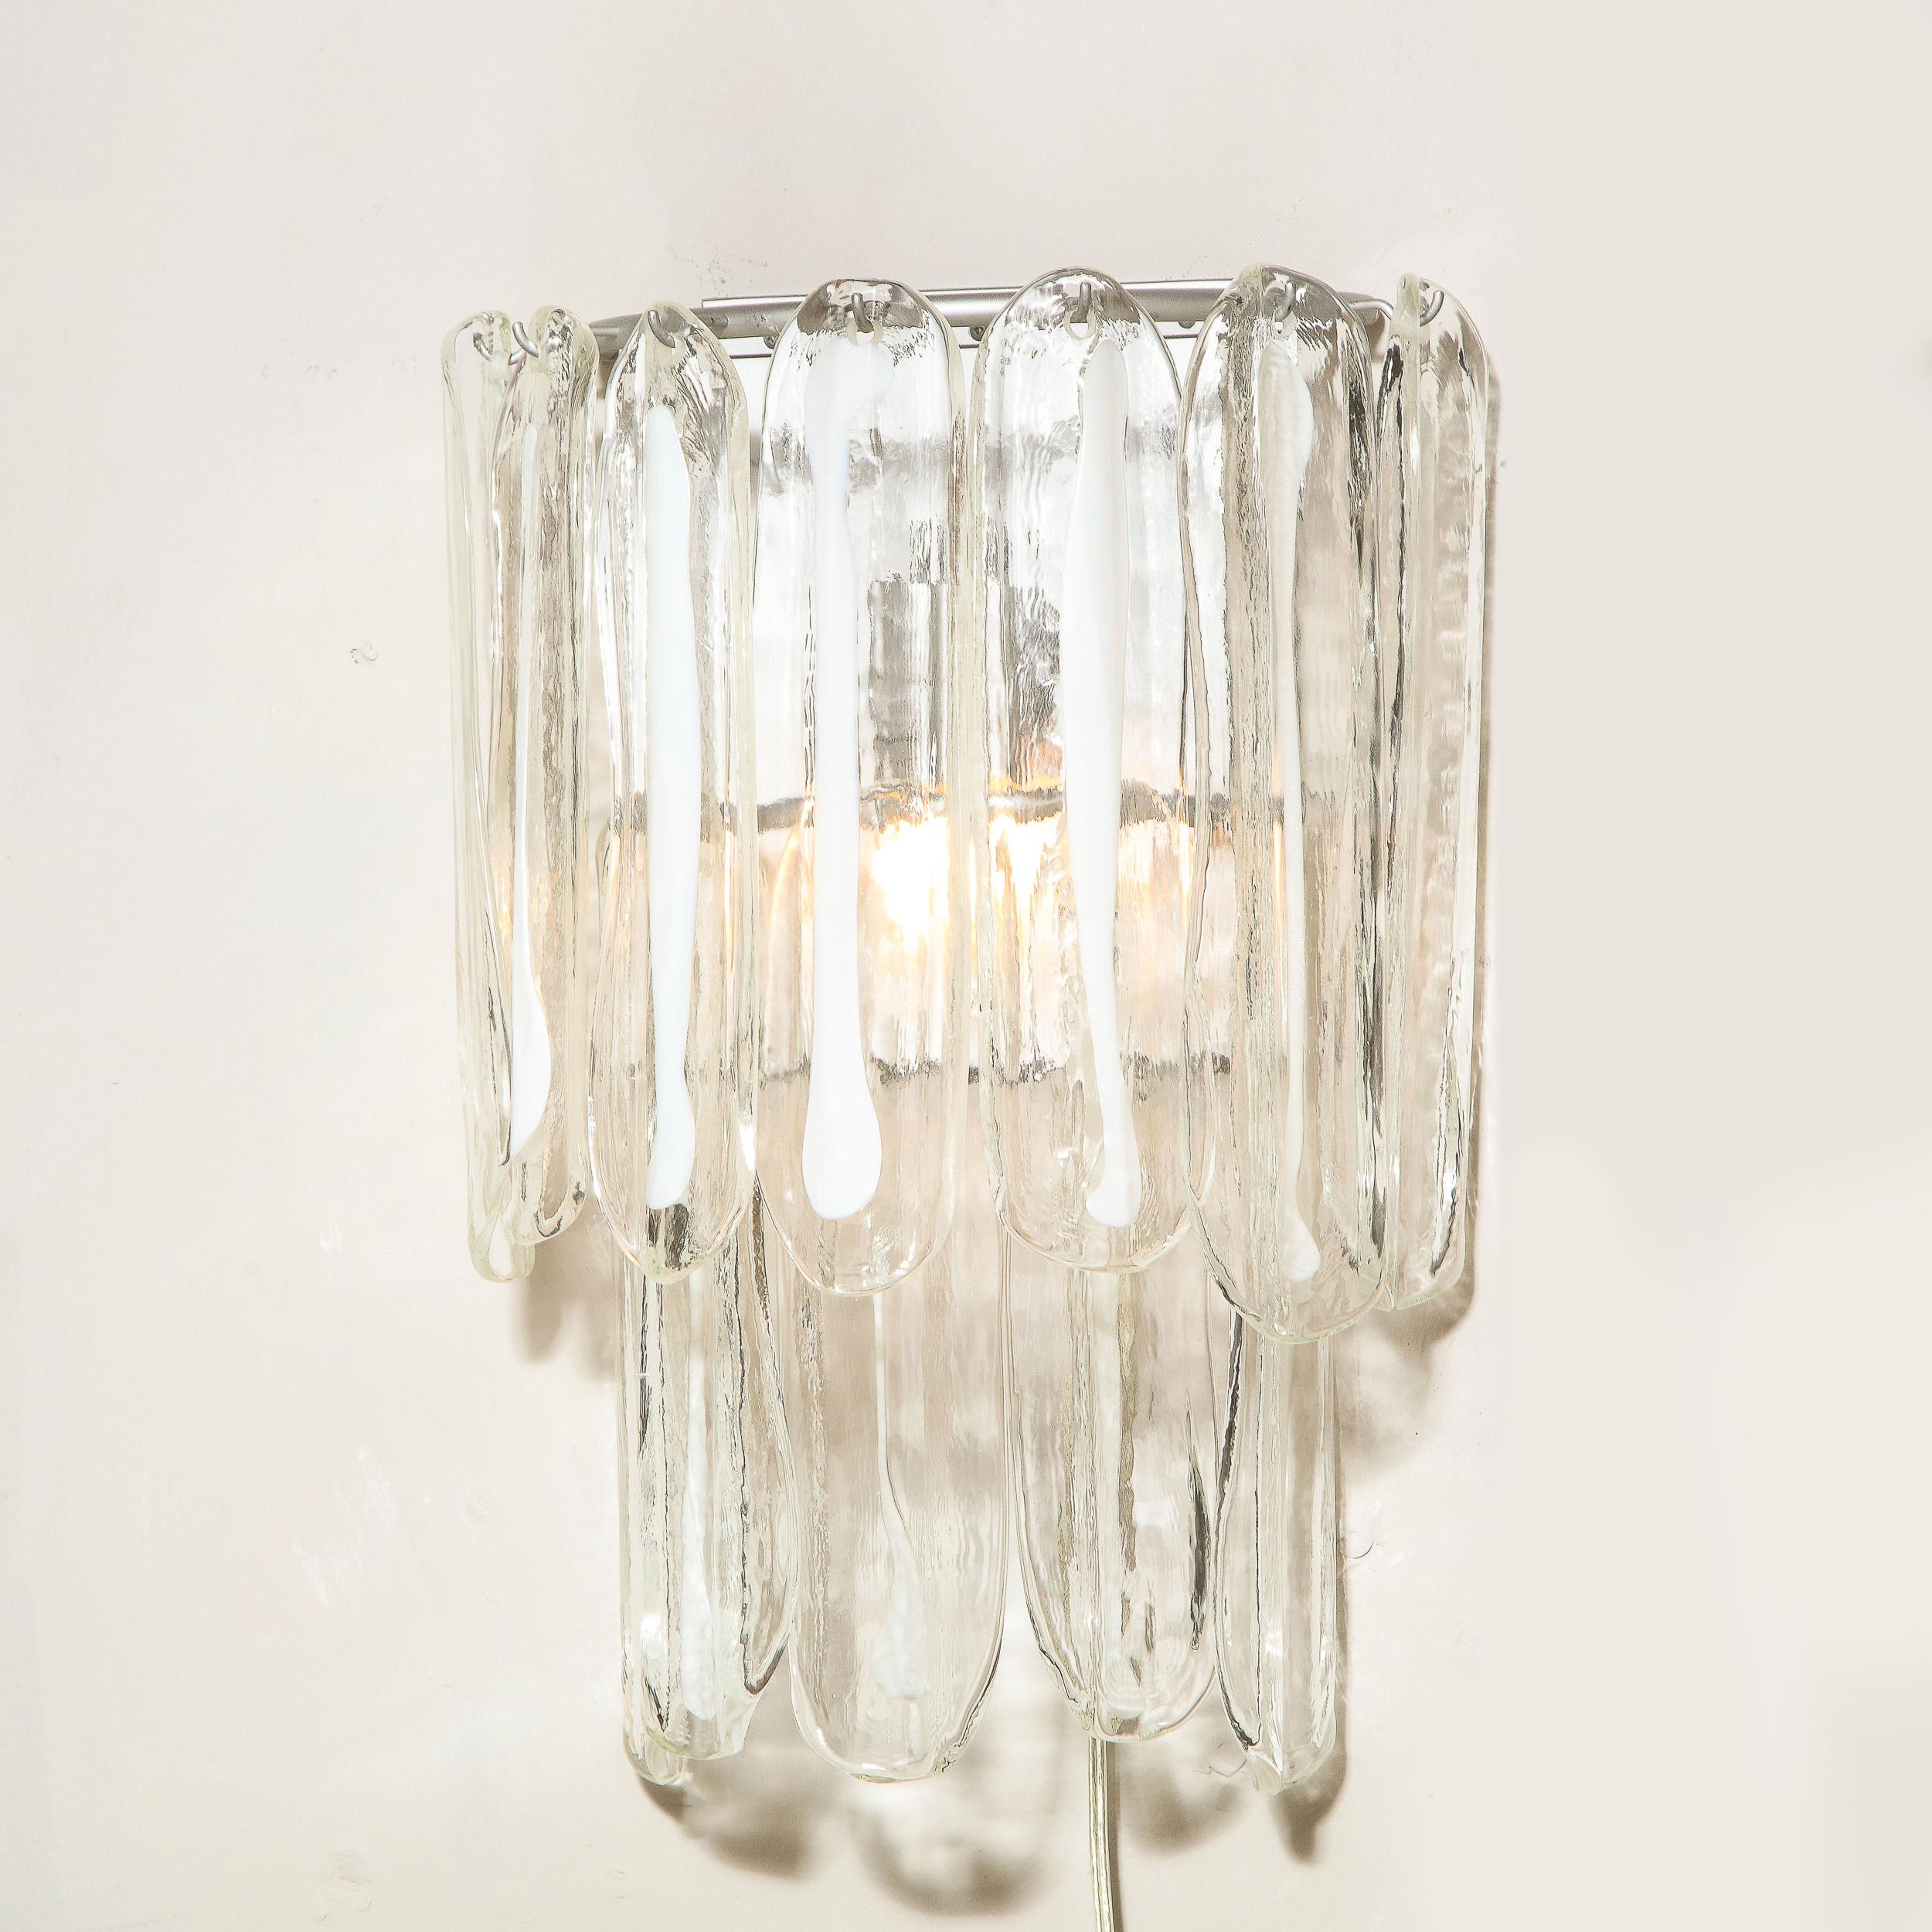 Pair of Mid-Century Modern Translucent & White Murano Glass Sconces by Mazzega For Sale 1